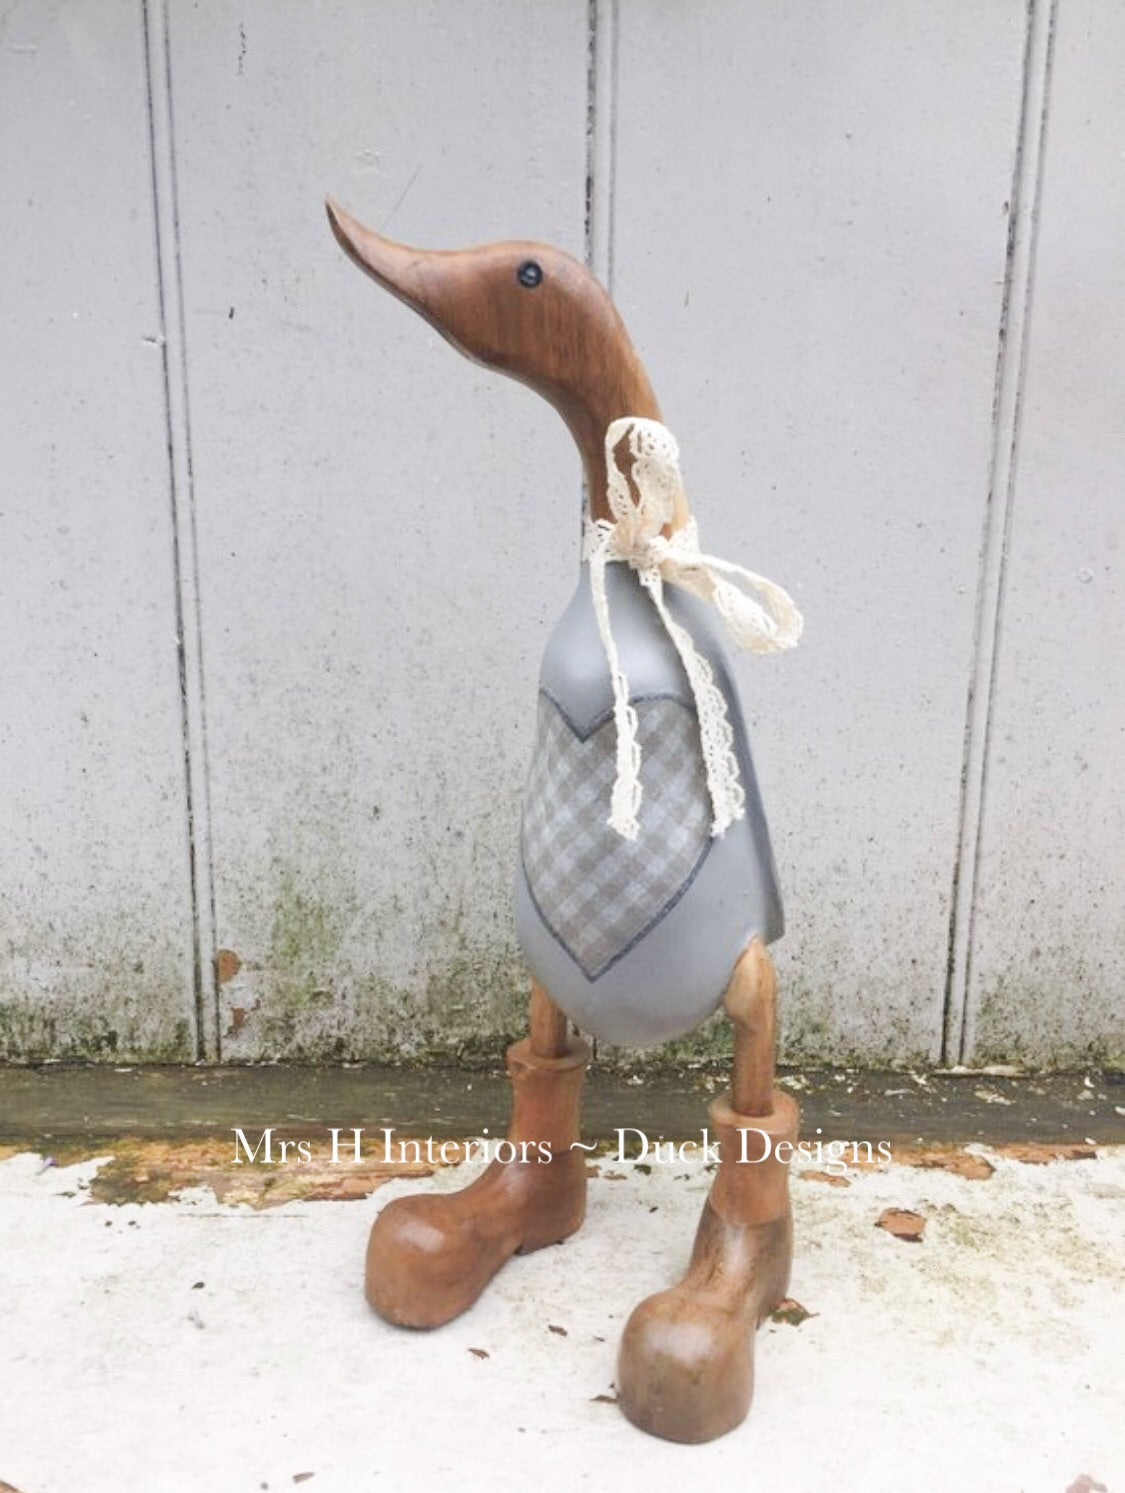 Patch - Decorated Wooden Duck in Boots by Mrs H the Duck Lady